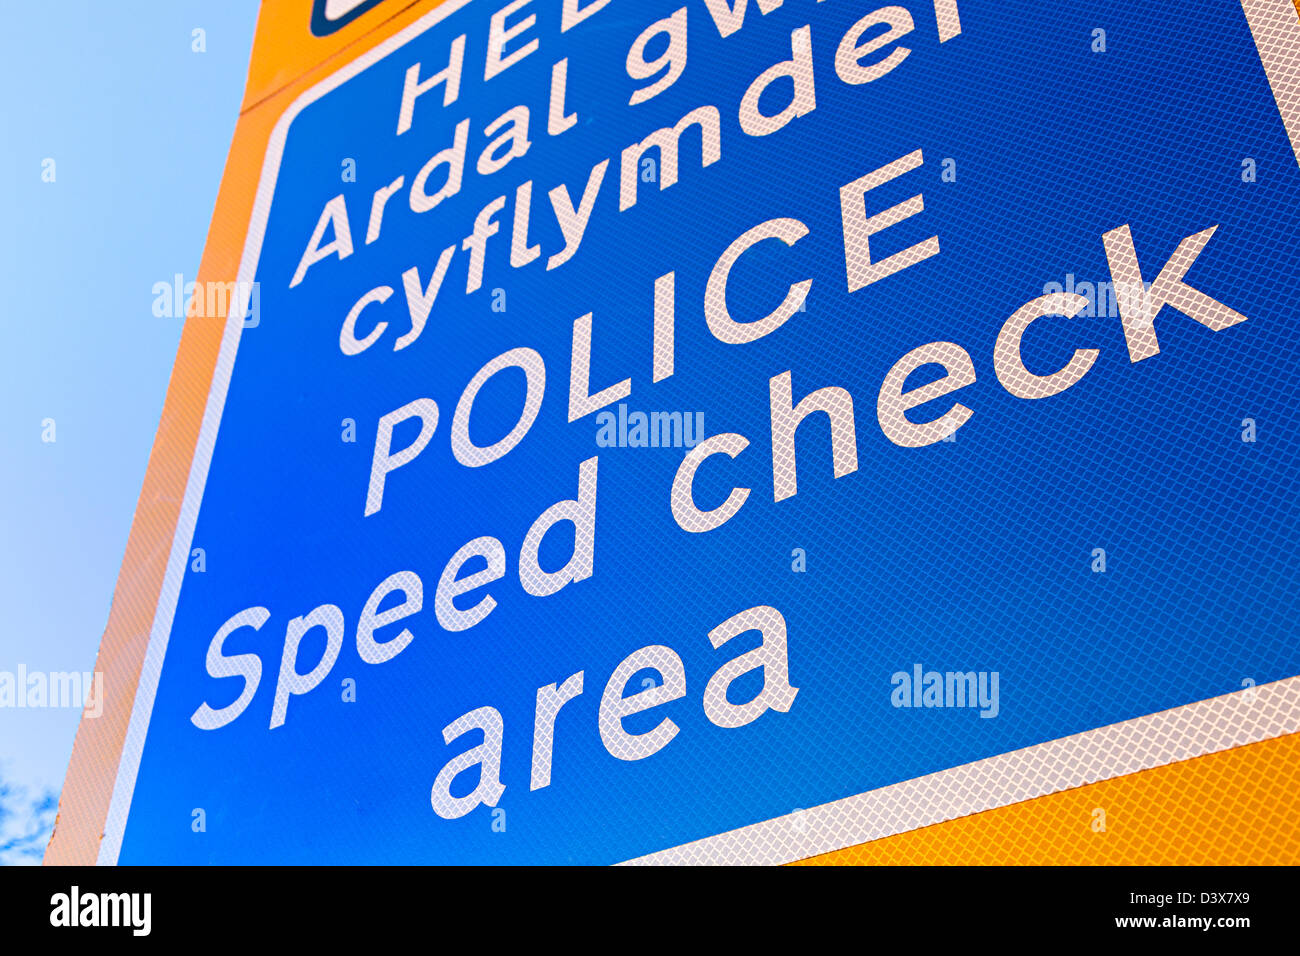 Police speed check area warning sign in English and Welsh, Trefecca, Wales, UK Stock Photo